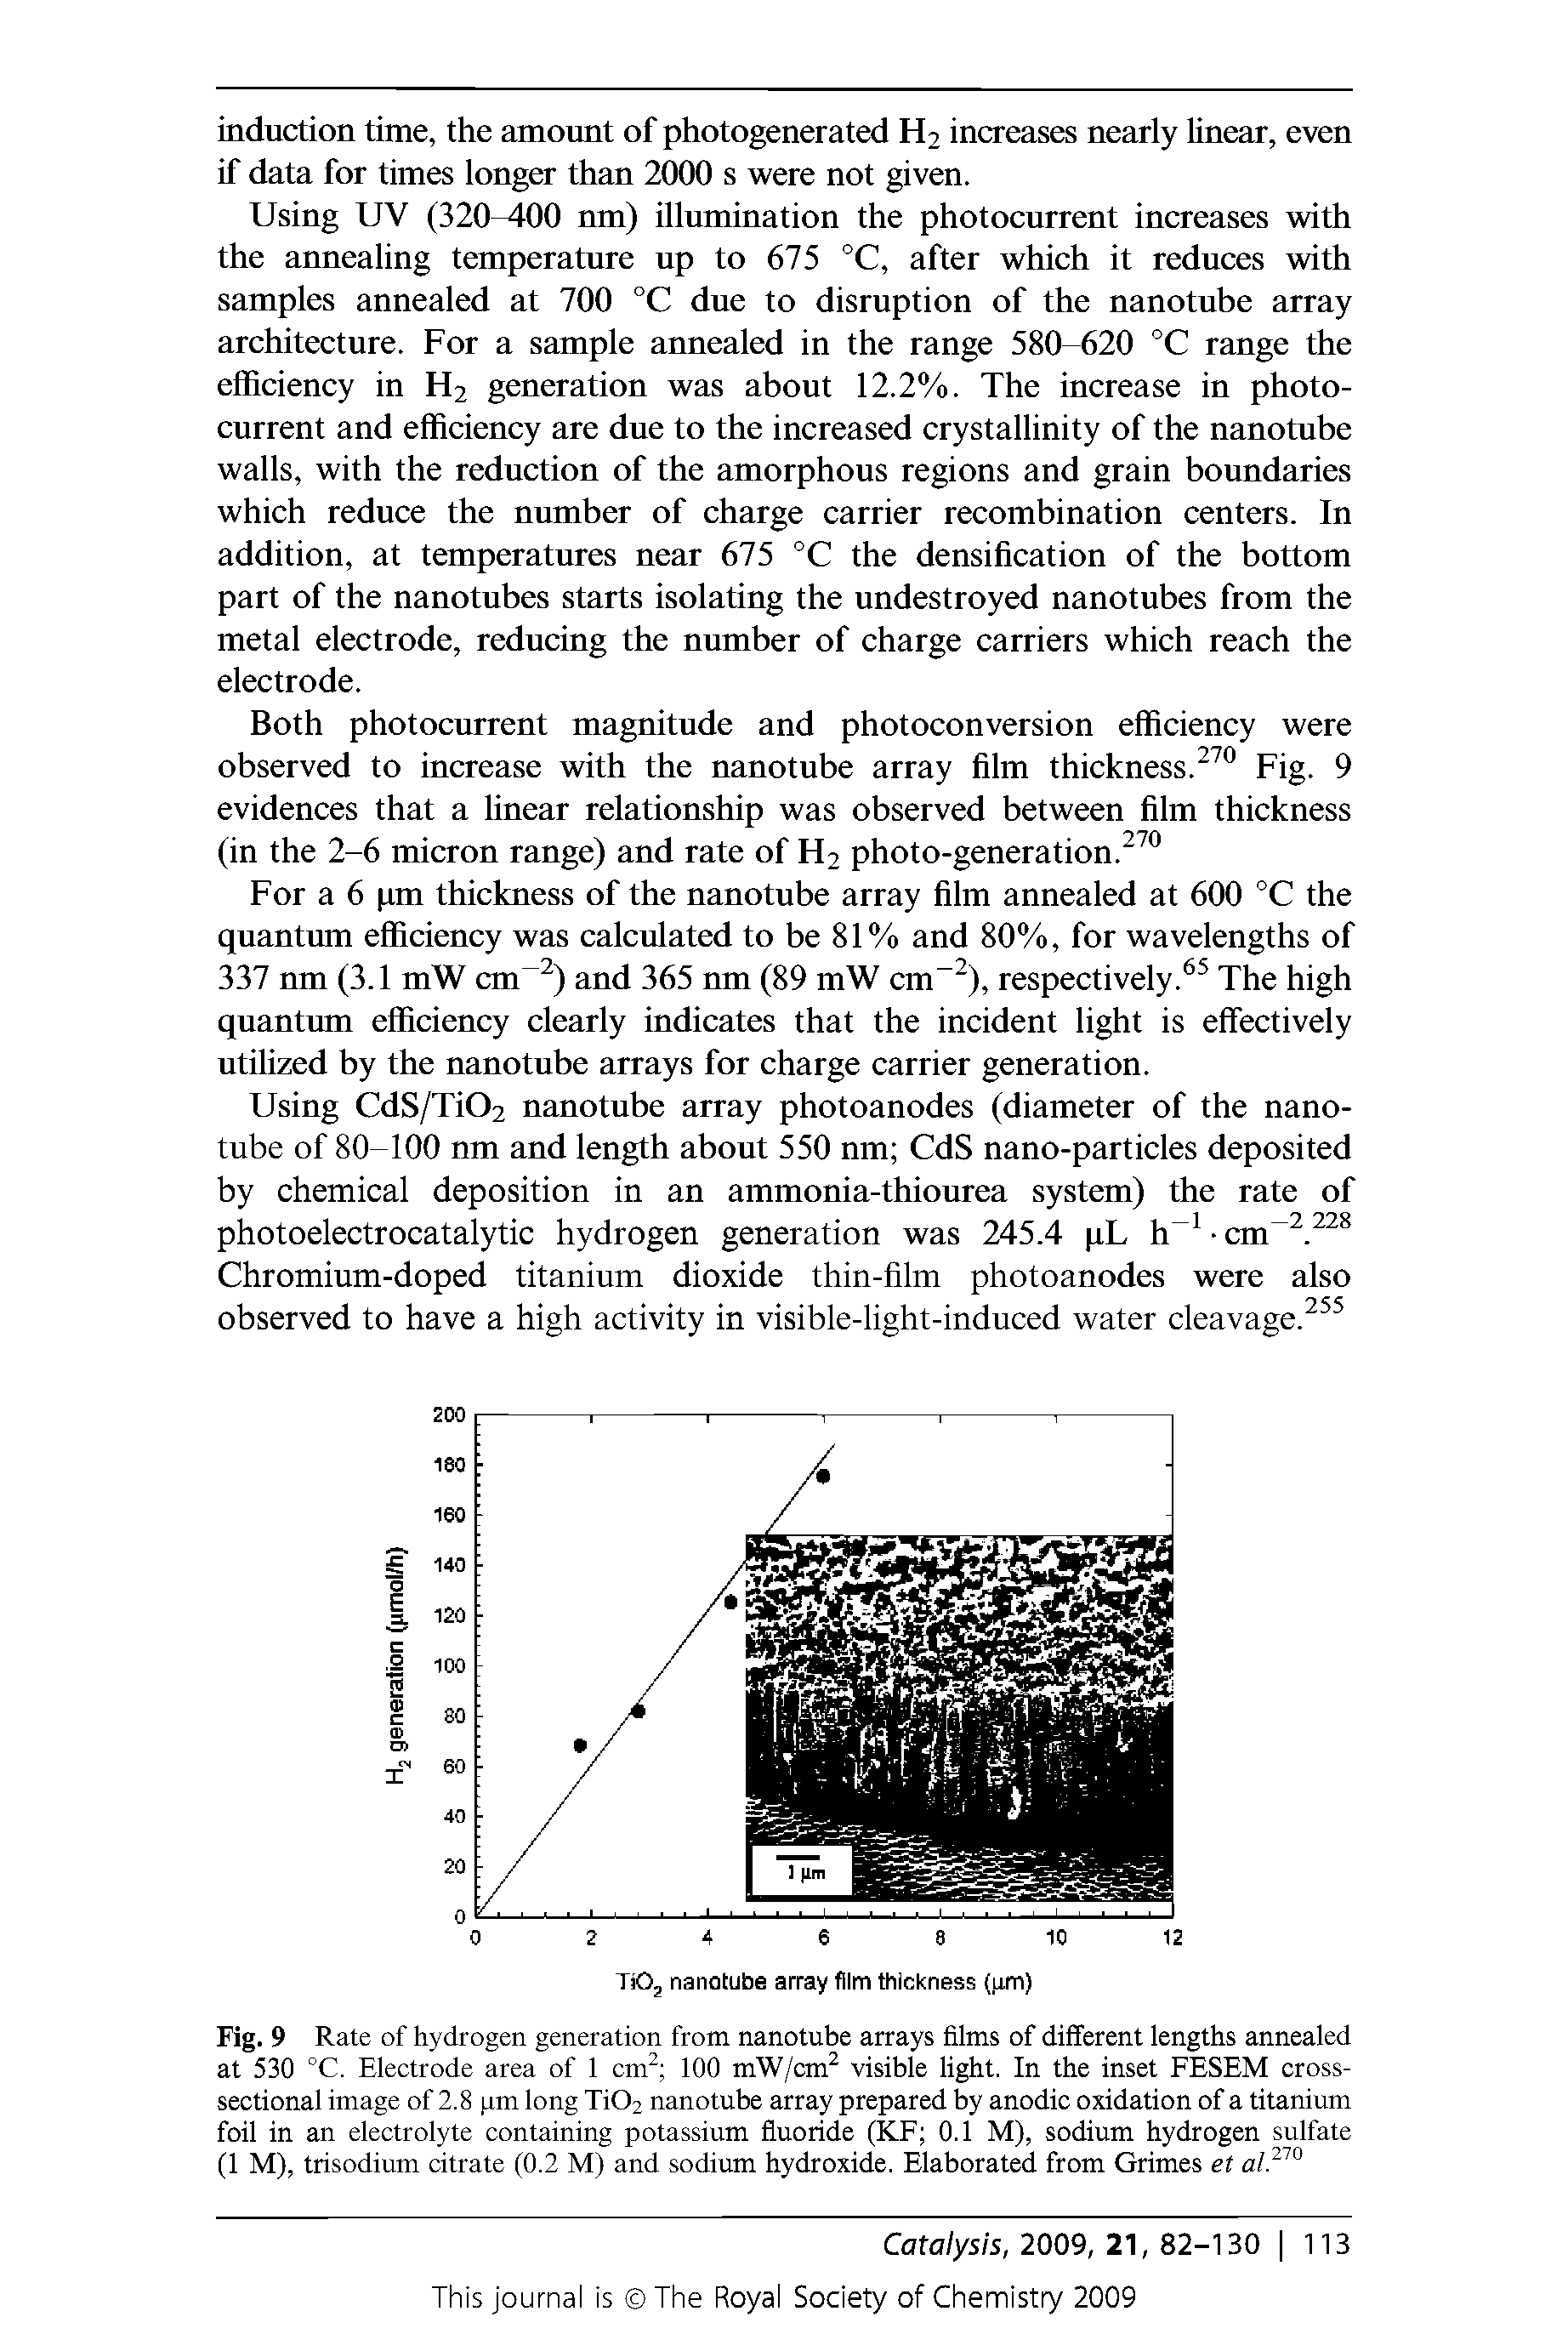 Fig. 9 Rate of hydrogen generation from nanotube arrays films of different lengths annealed at 530 °C. Electrode area of 1 cm 100 mW/cm visible light. In the inset FESEM cross-sectional image of 2.8 um long Xi02 nanotube array prepared by anodic oxidation of a titanium foil in an electrolyte containing potassium fluoride (KF 0.1 M), sodium hydrogen sulfate (1 M), trisodium citrate (0.2 M) and sodium hydroxide. Elaborated from Grimes et...